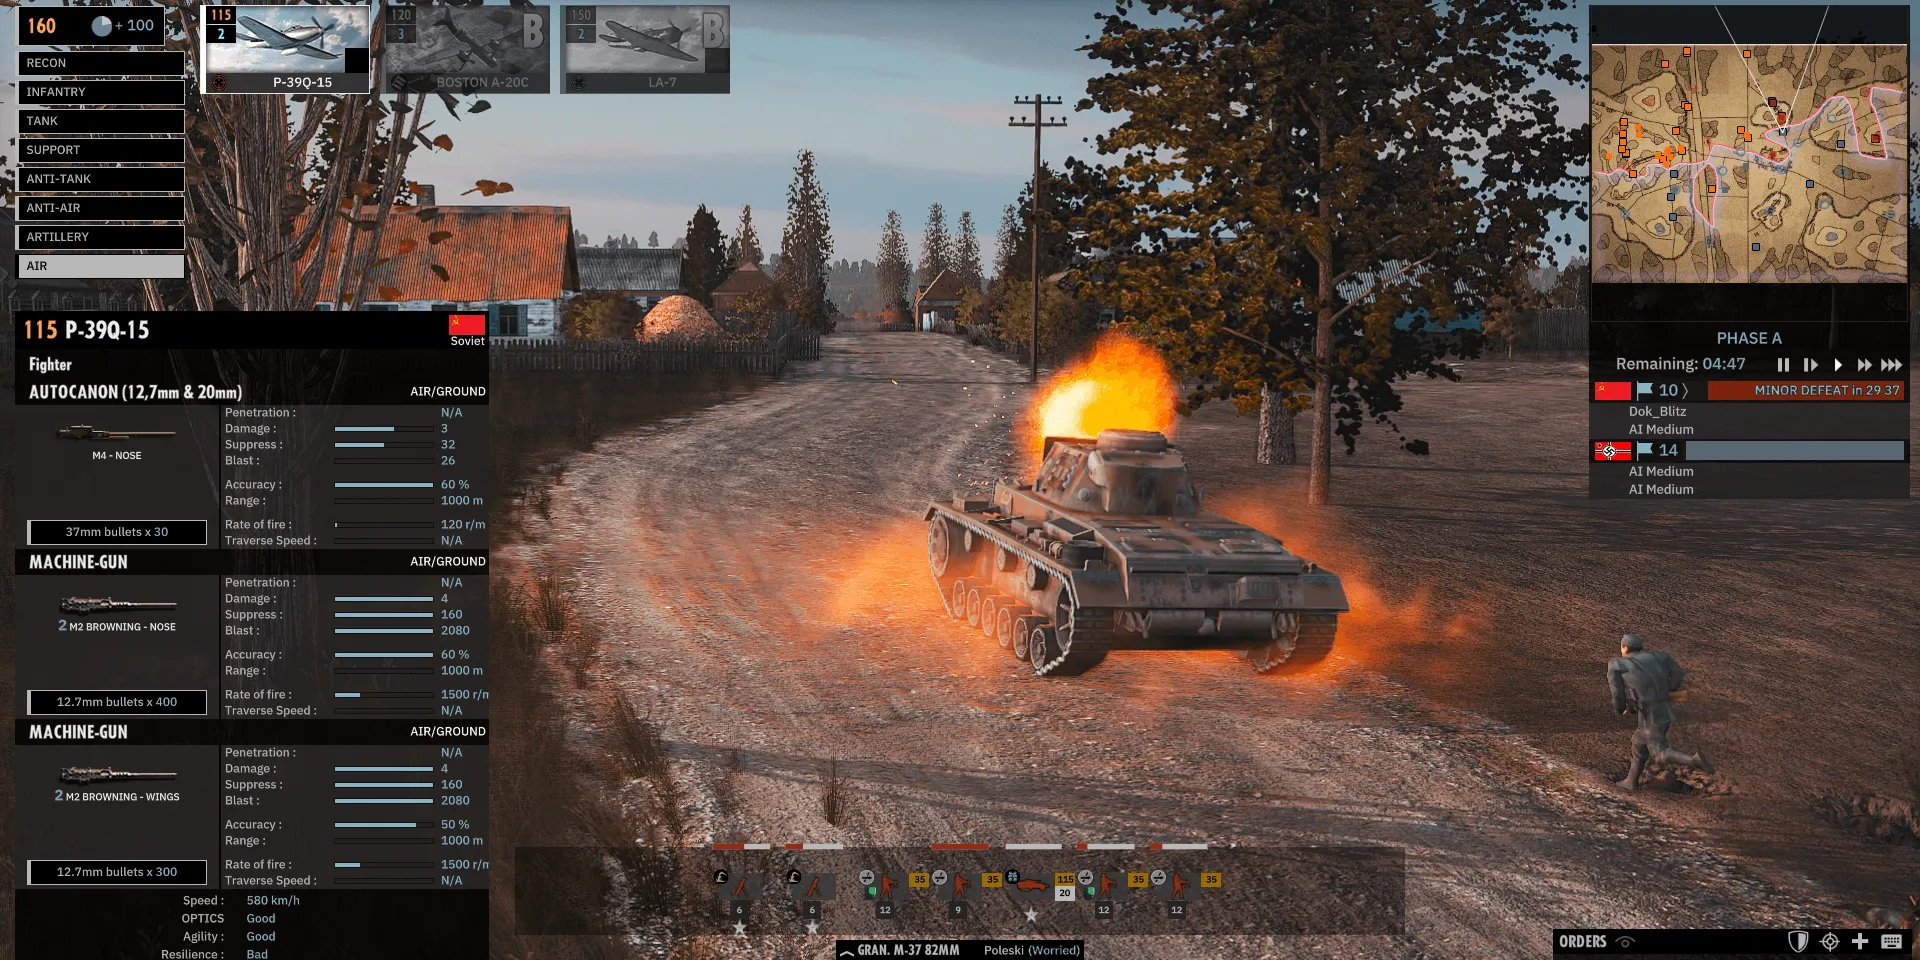 gameplay screenshot from steel division 2